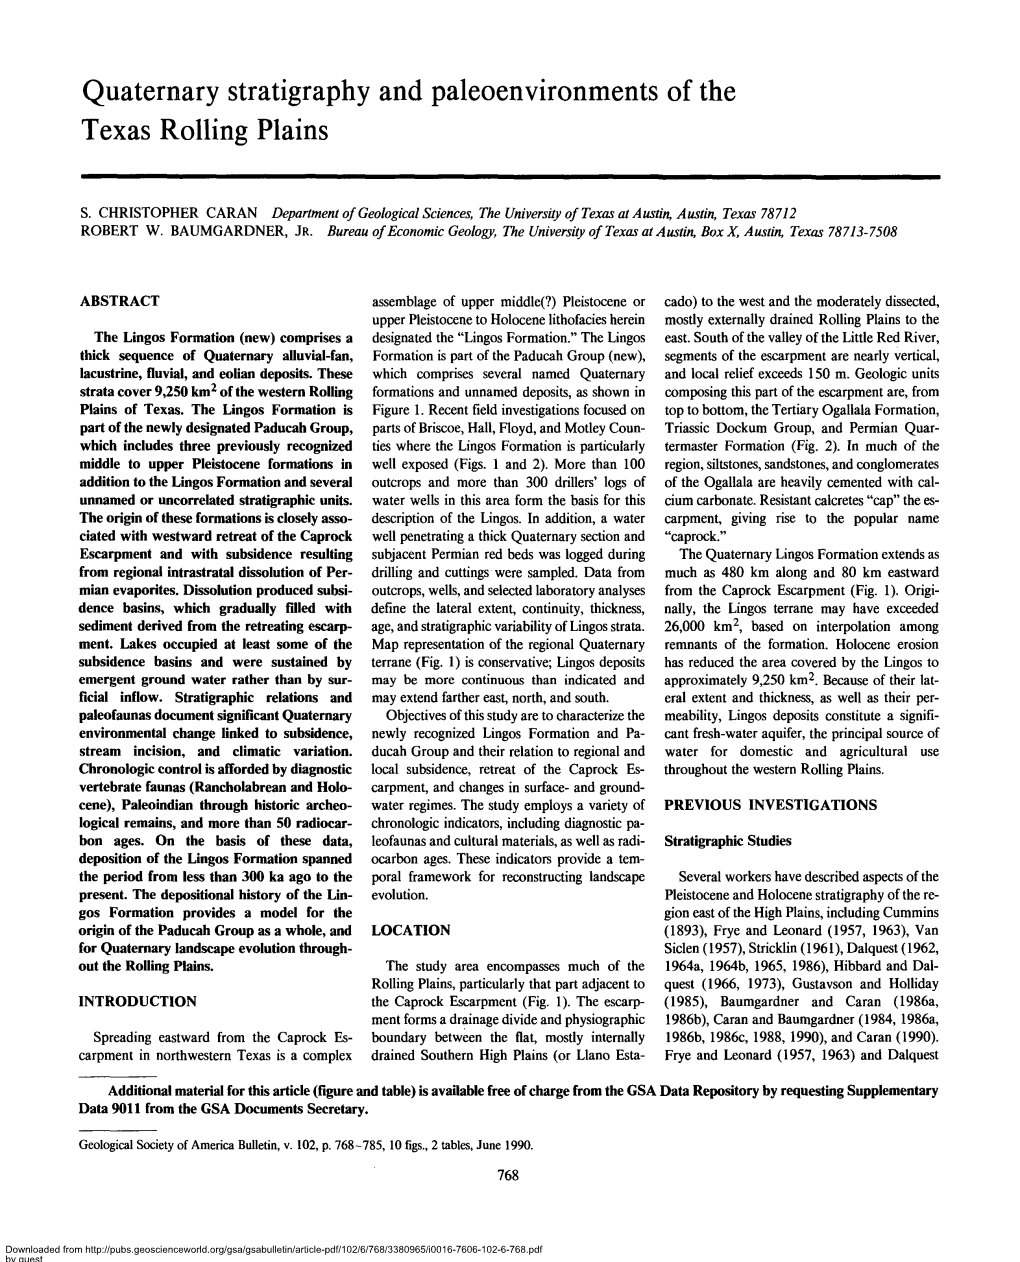 Quaternary Stratigraphy and Paleoenvironments of the Texas Rolling Plains